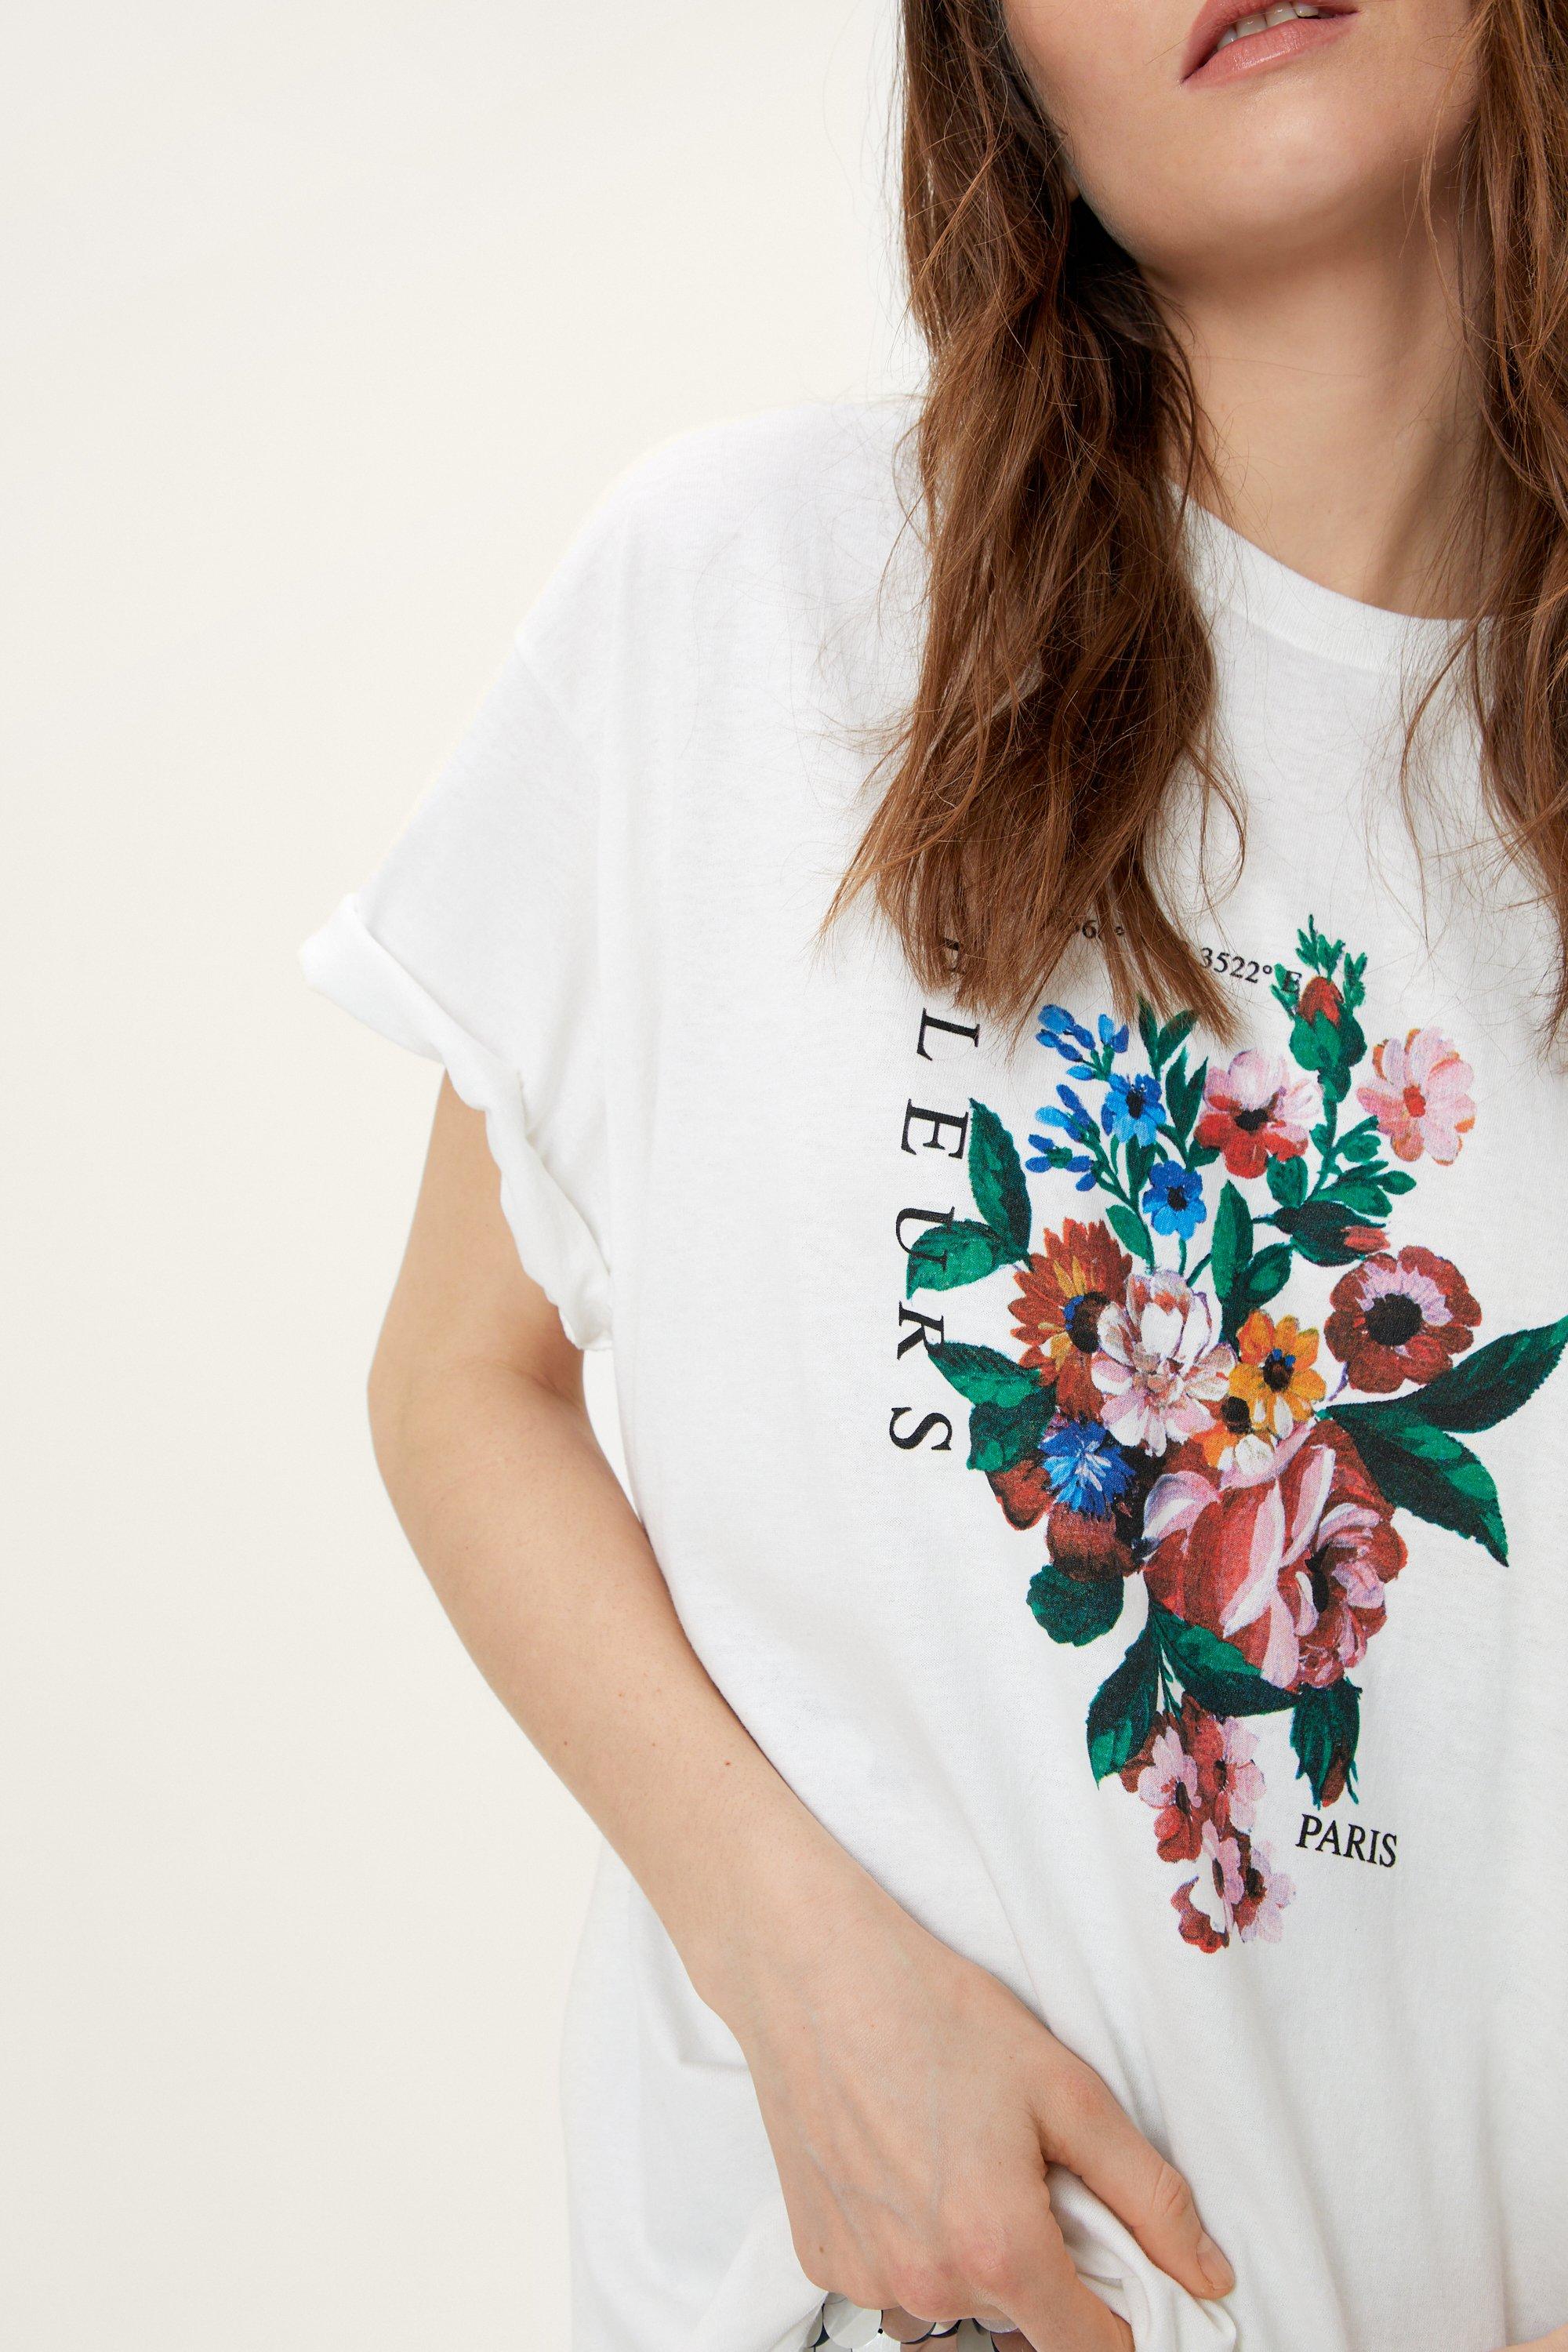 Hand-painted Short Oversized Floral T-shirt for Women. Bright 